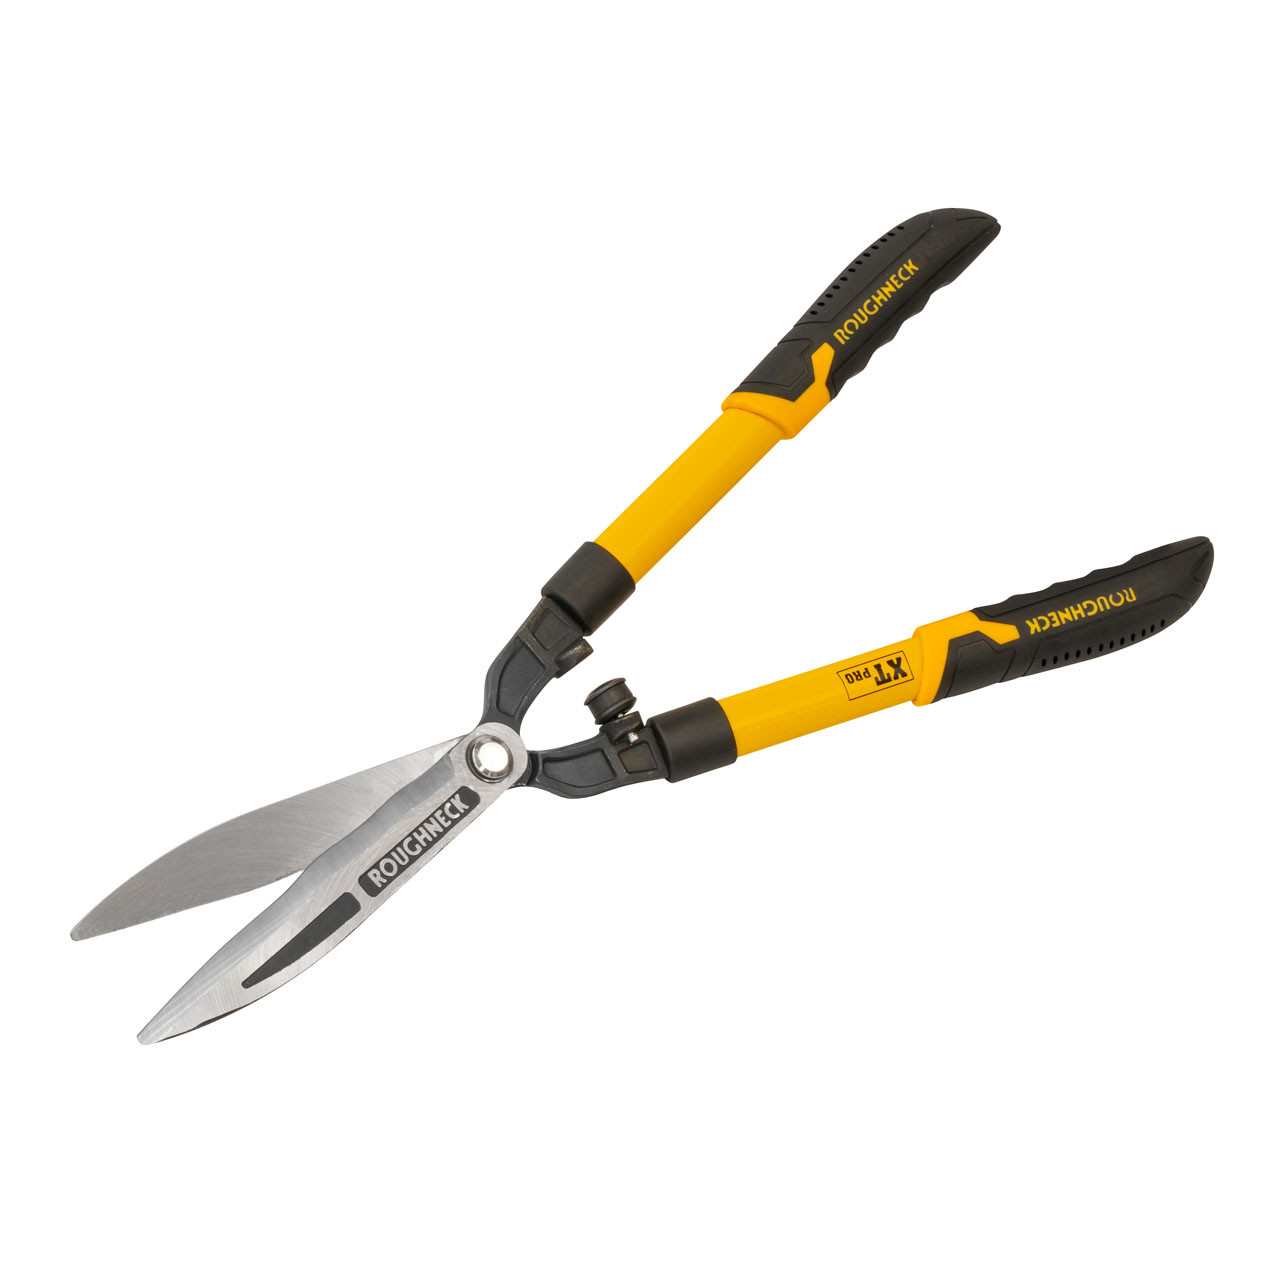 Photograph of Roughneck XT Pro Hedge Shears